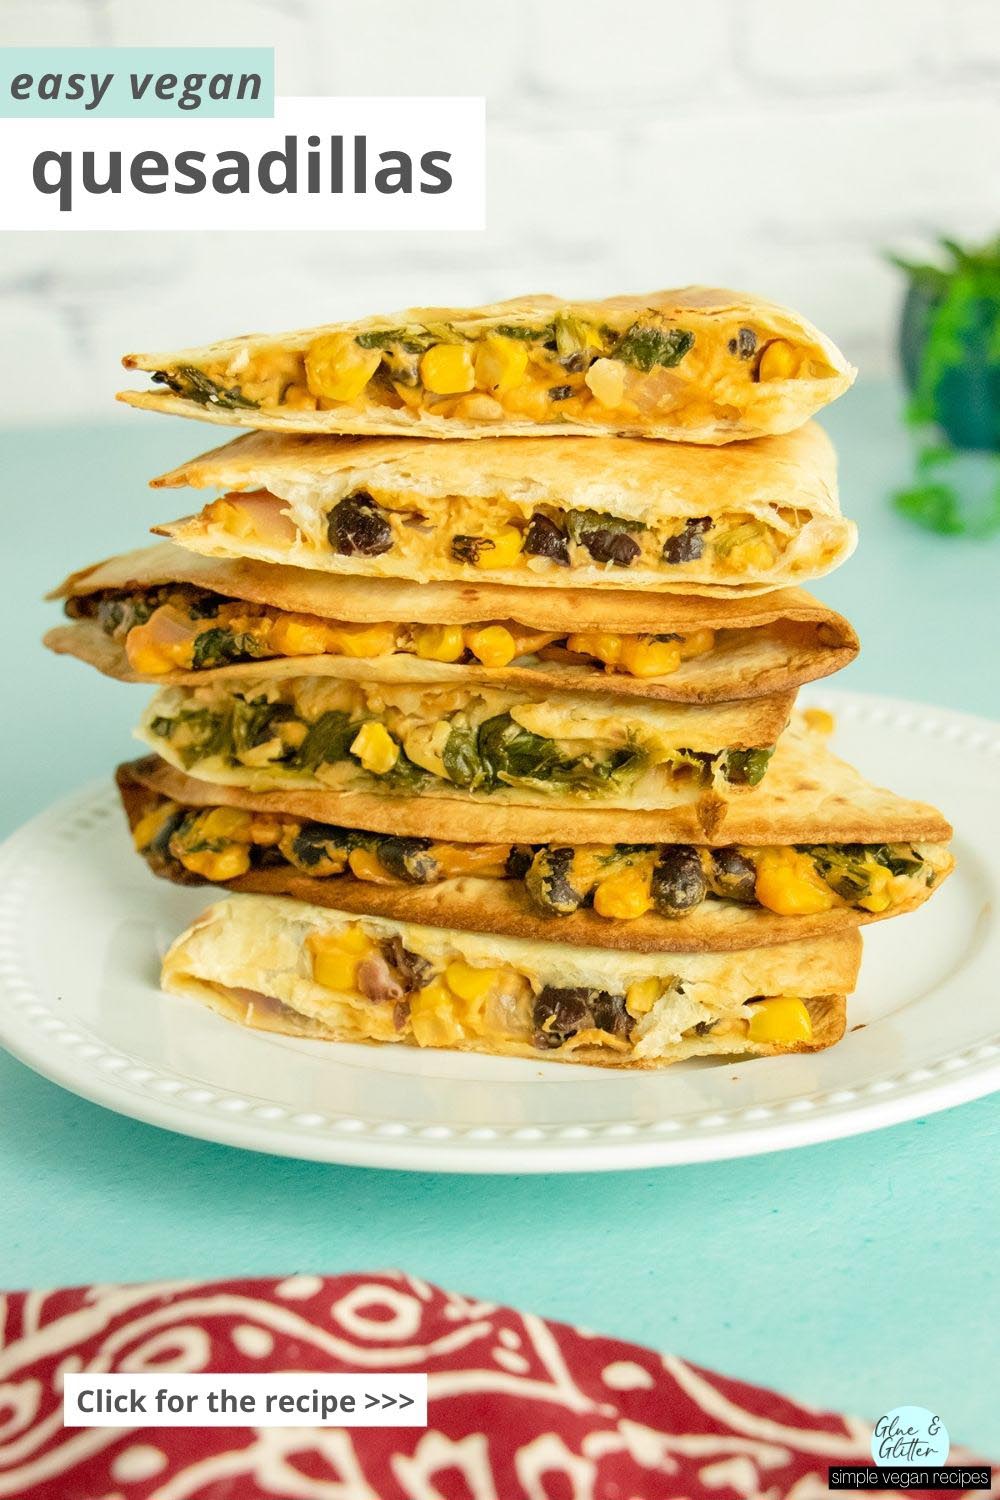 a stack of vegan quesadillas with beans and corn on a white plate, text overlay